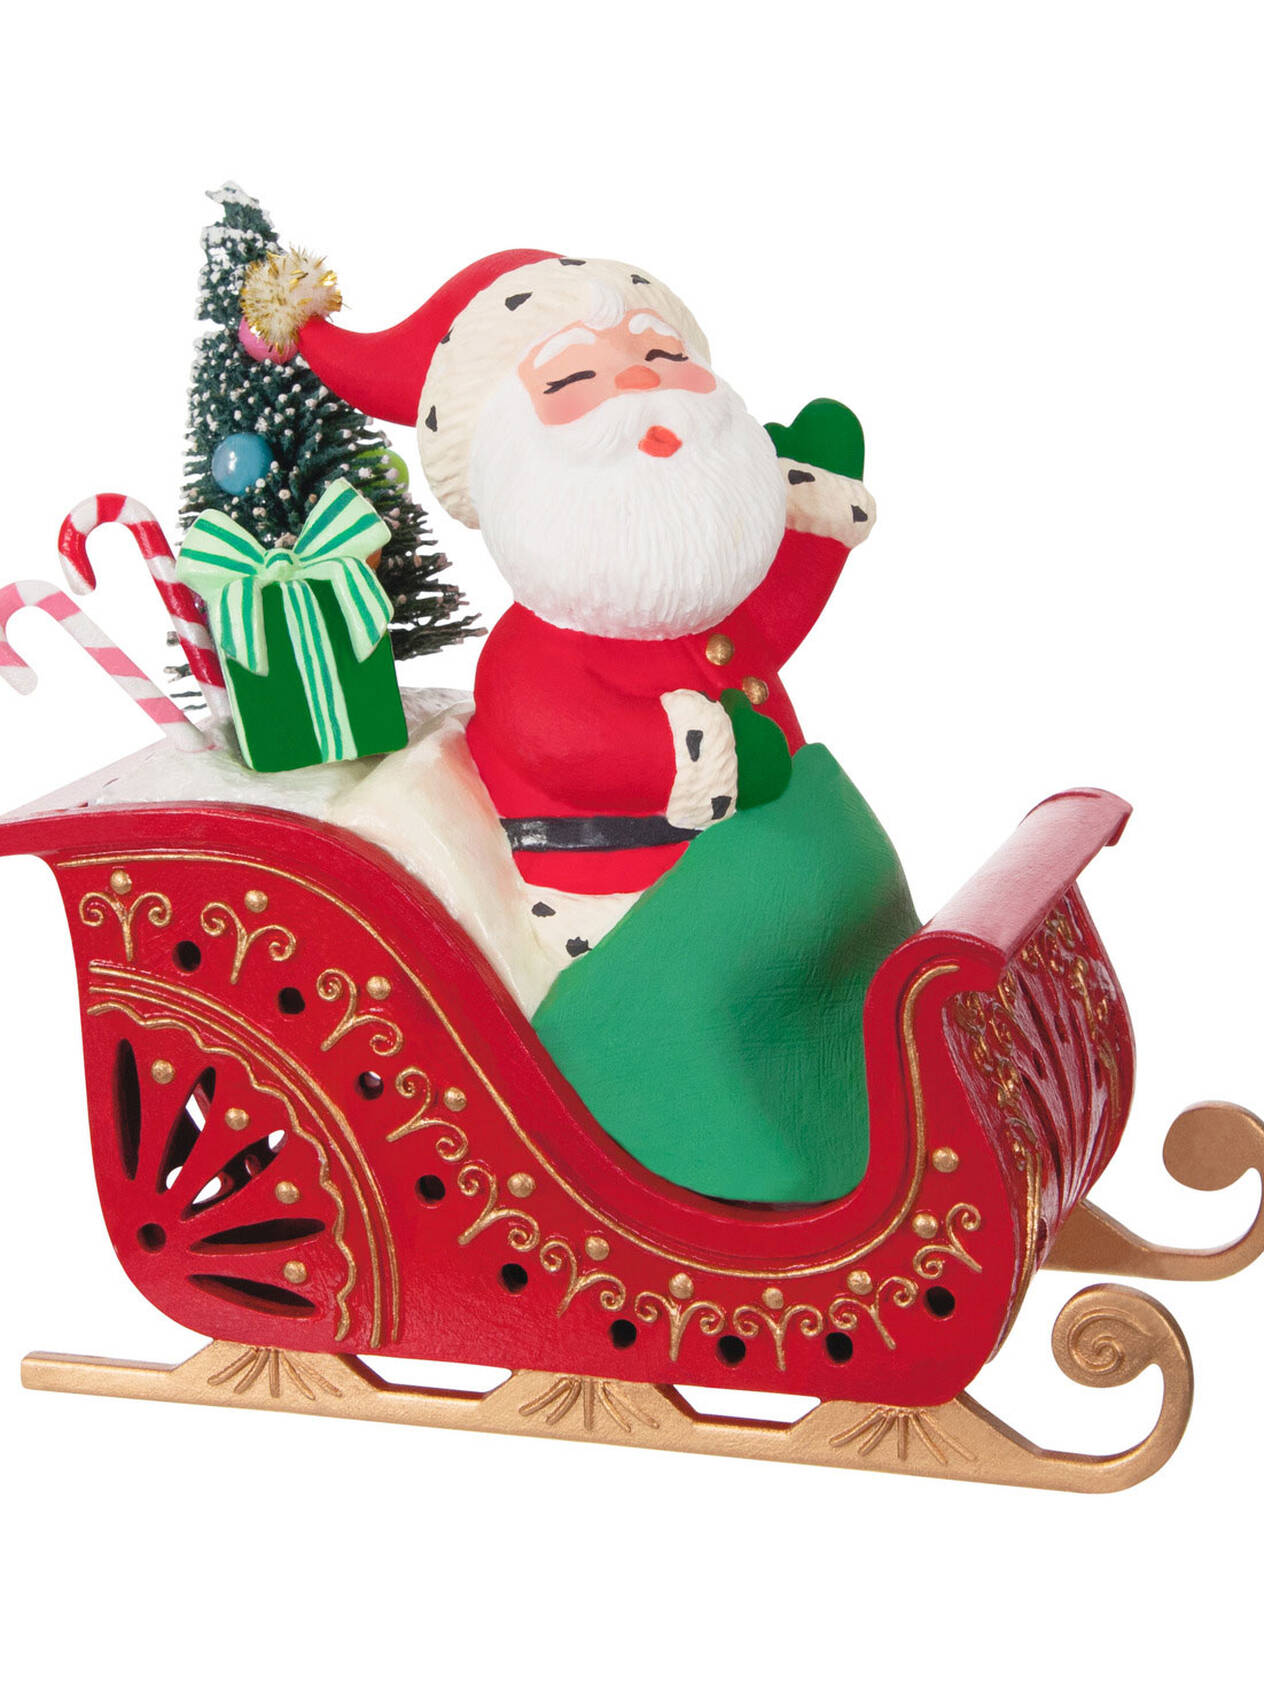 Mini Vintage Santa ShowToppers Musical Tree Topper With Light, 4.26”